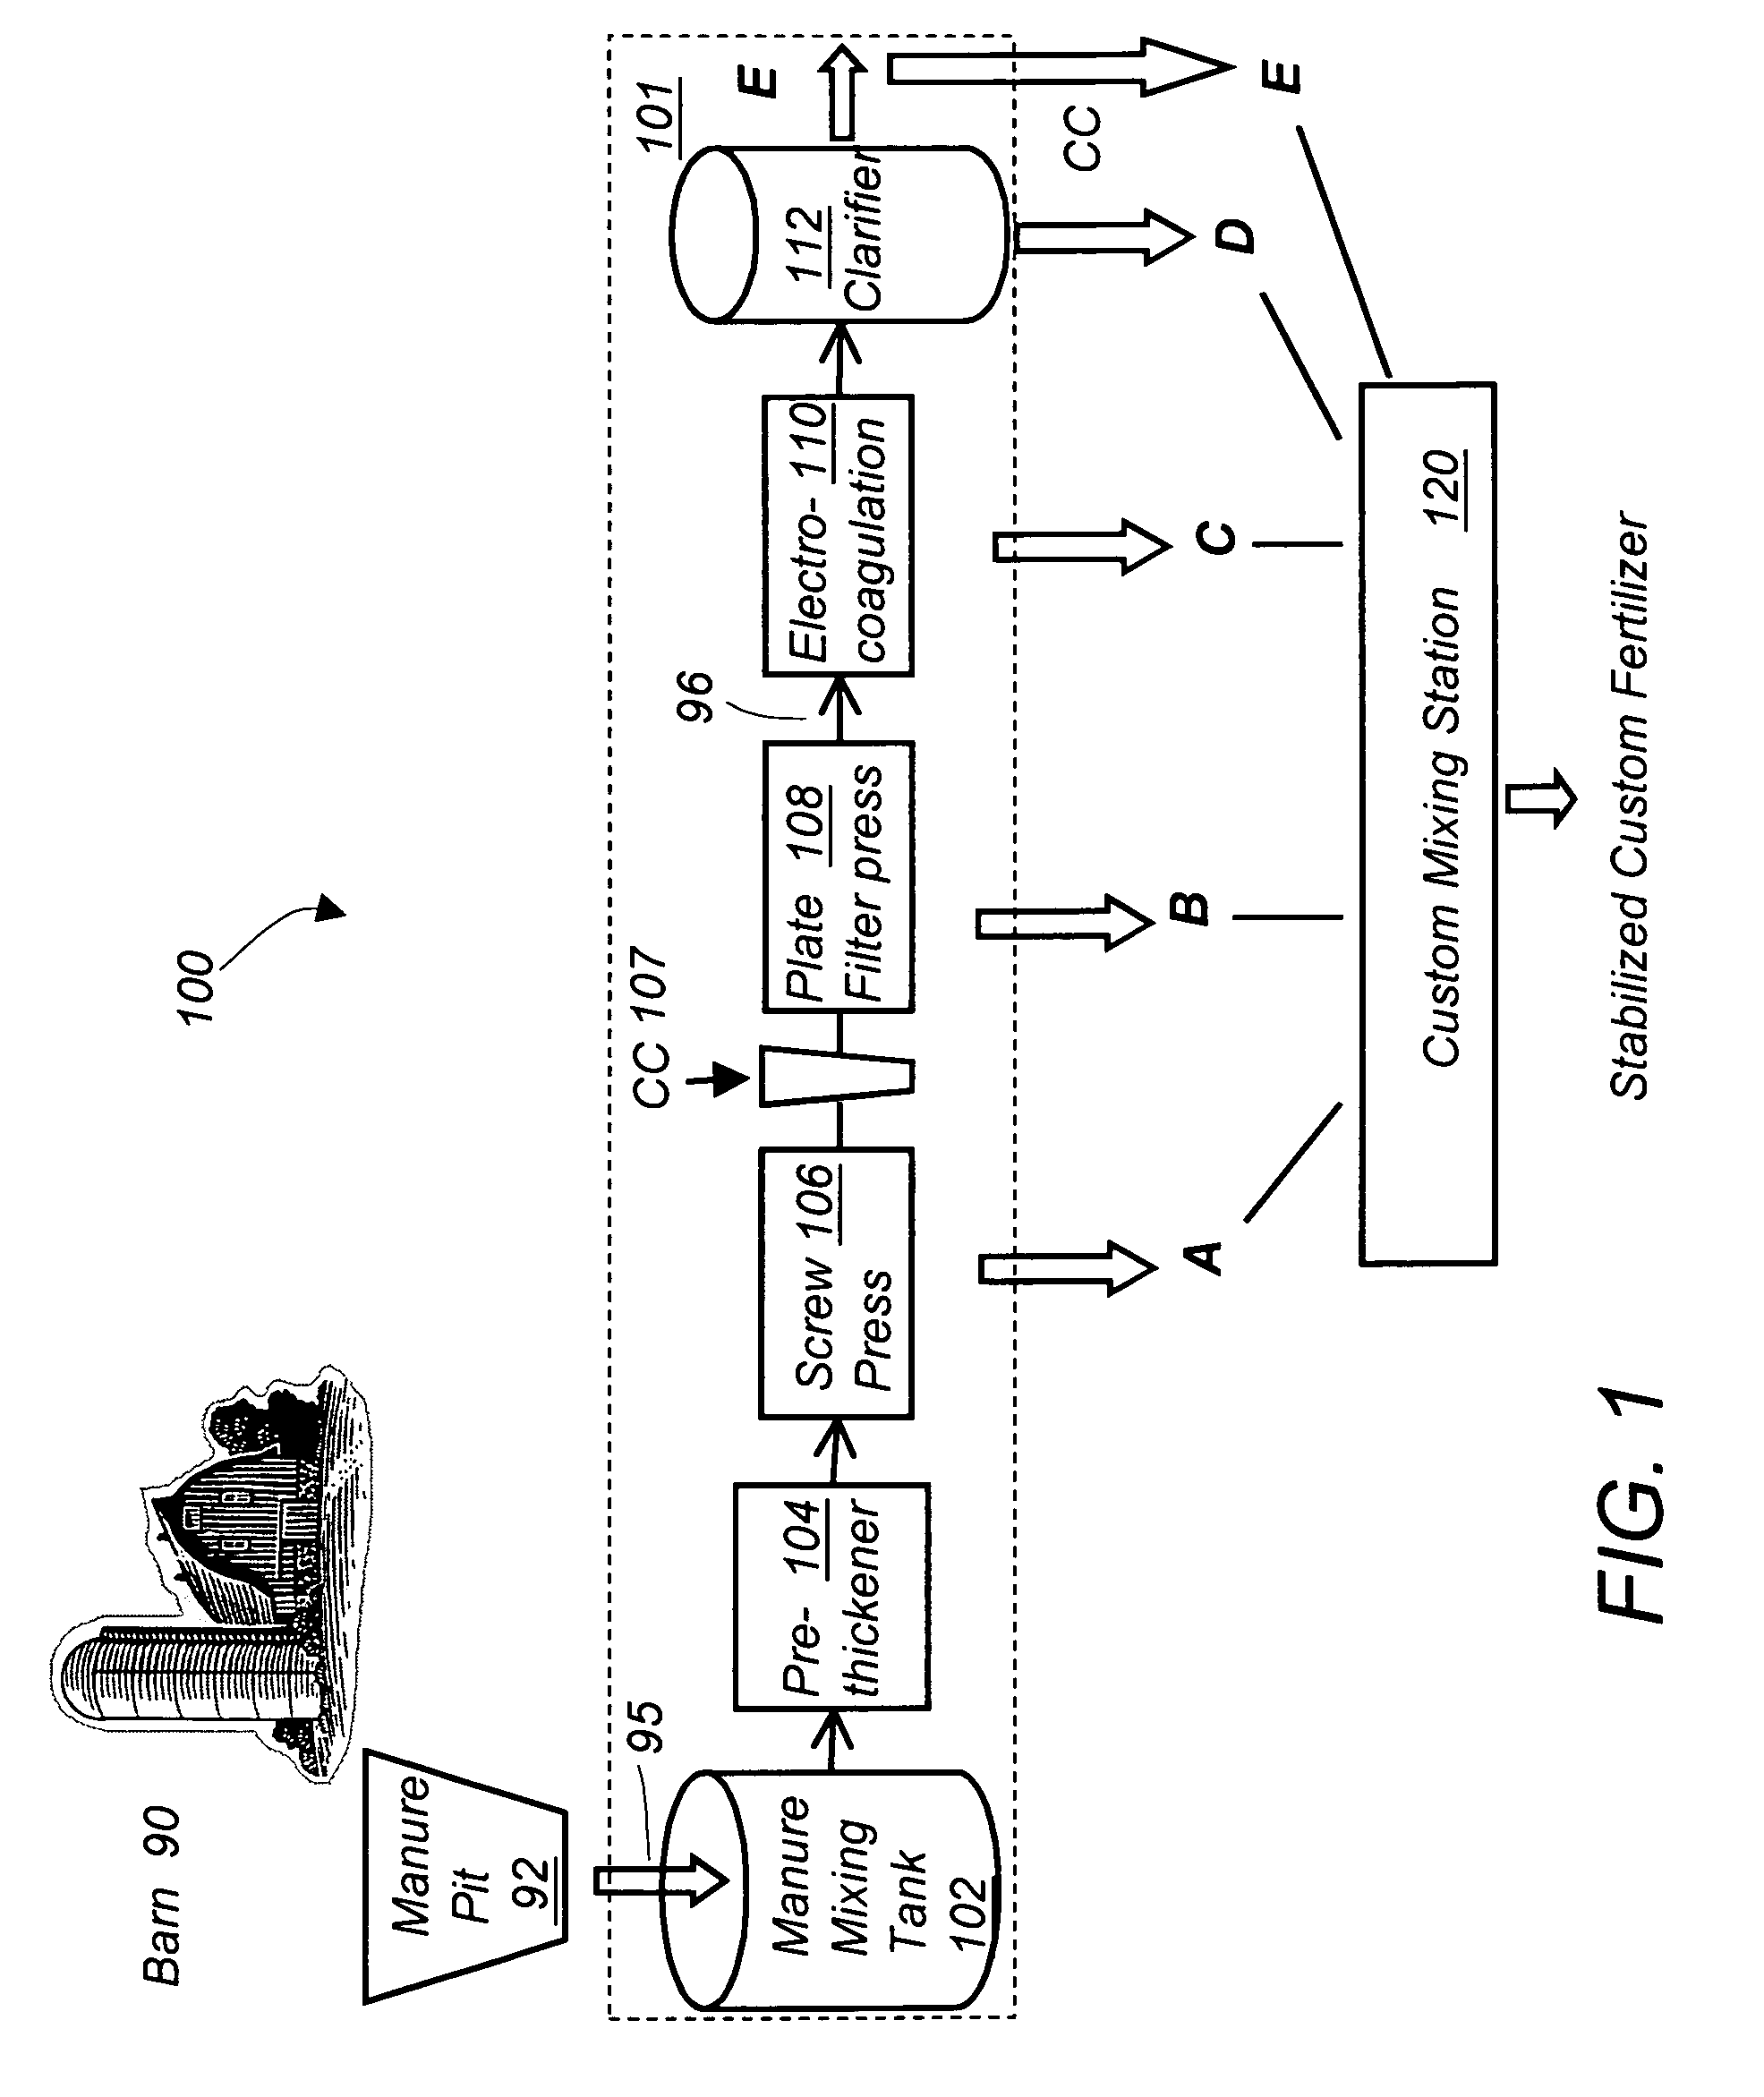 Apparatus and method for manure reclamation